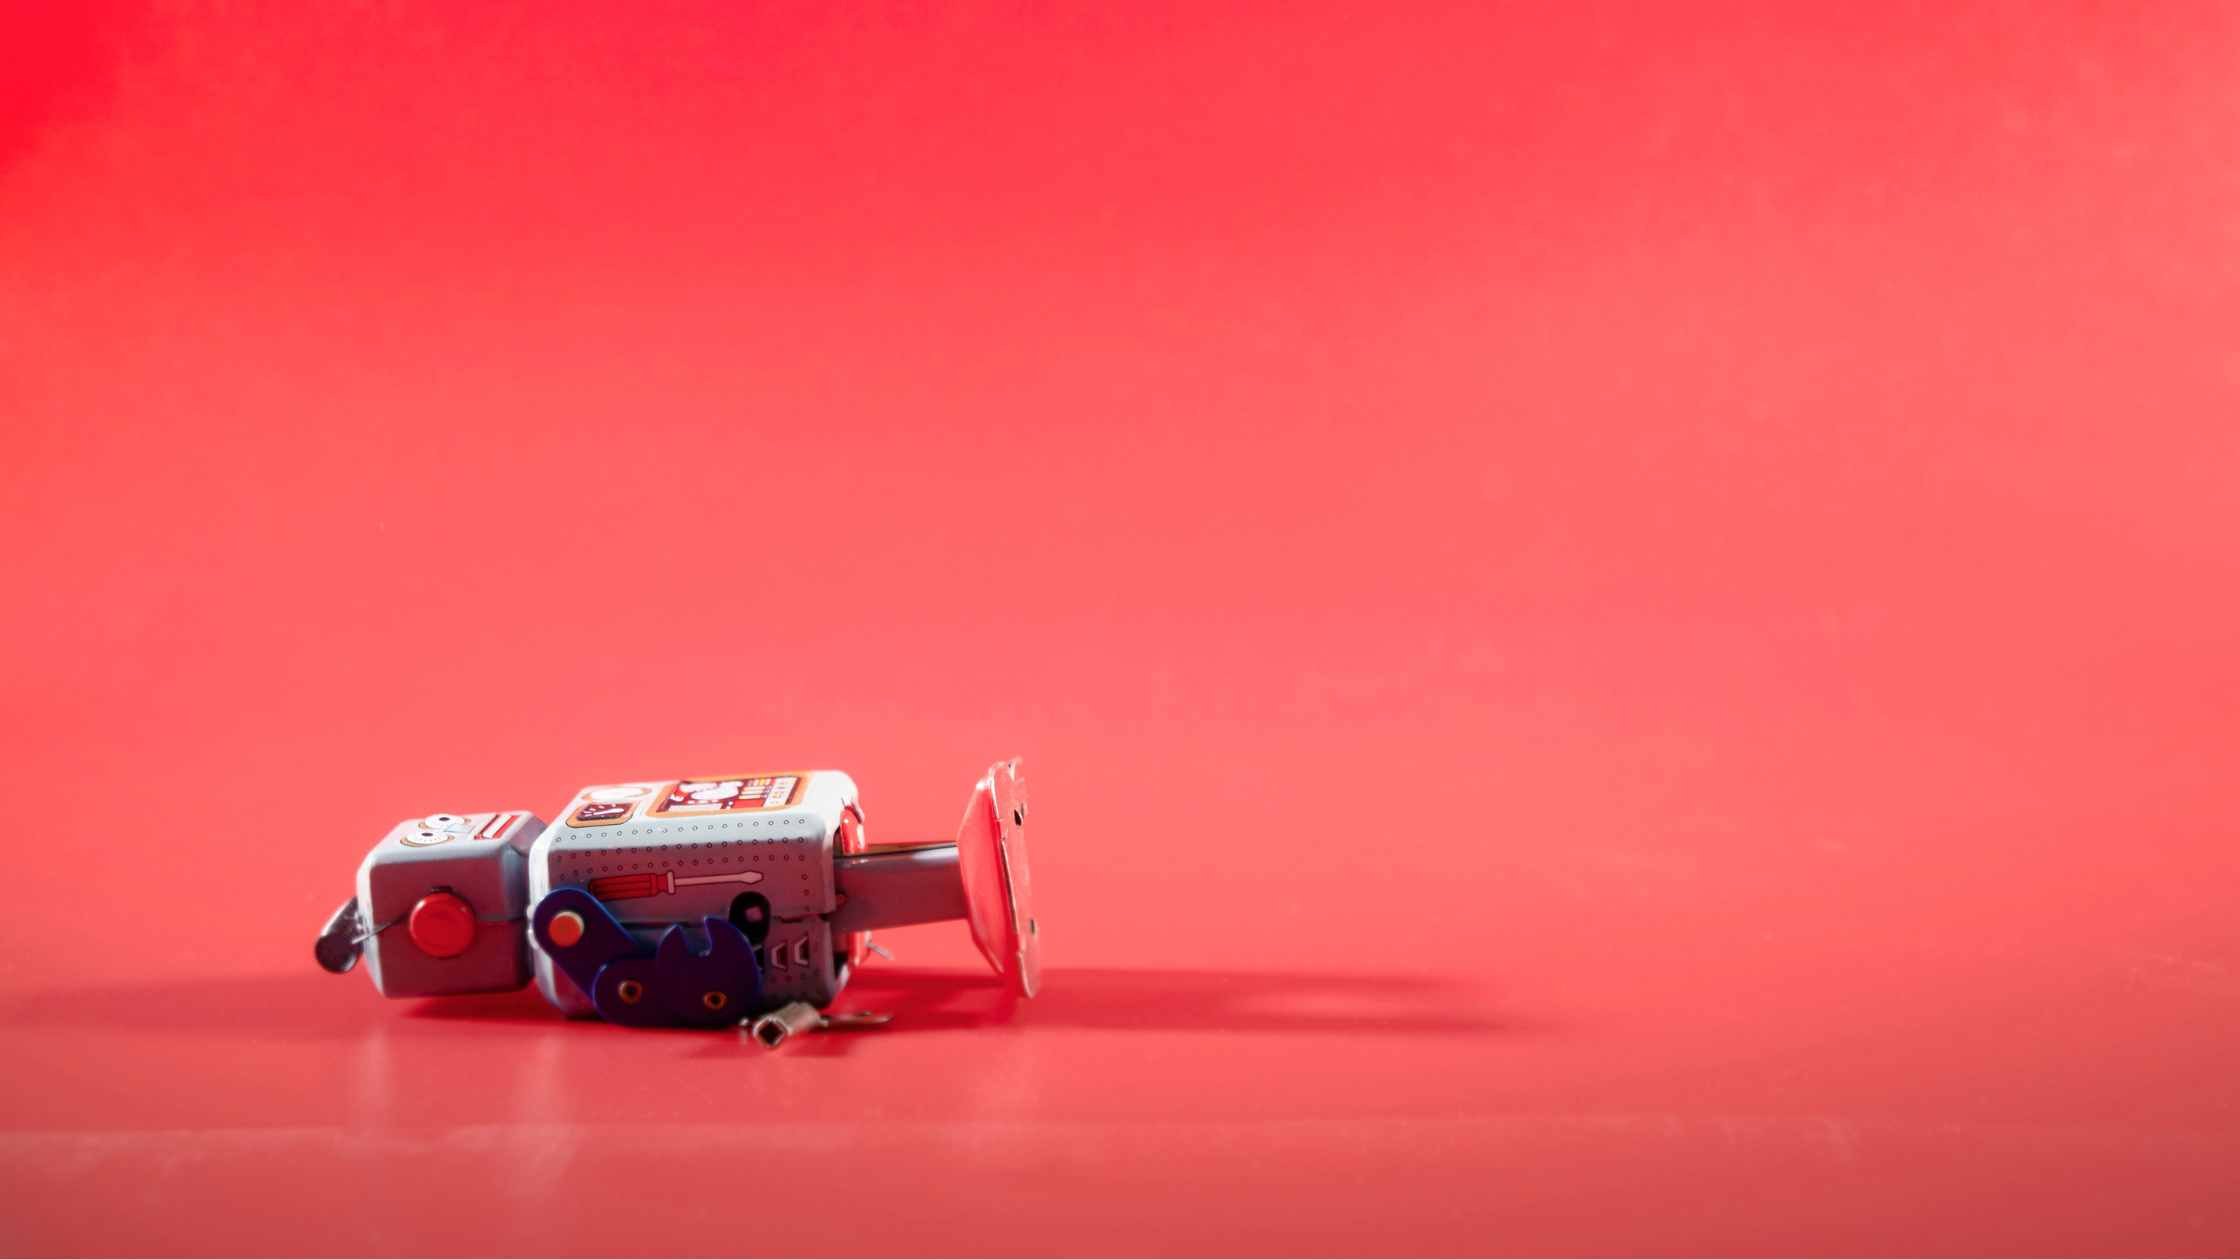 Red toy robot, lying down; red background